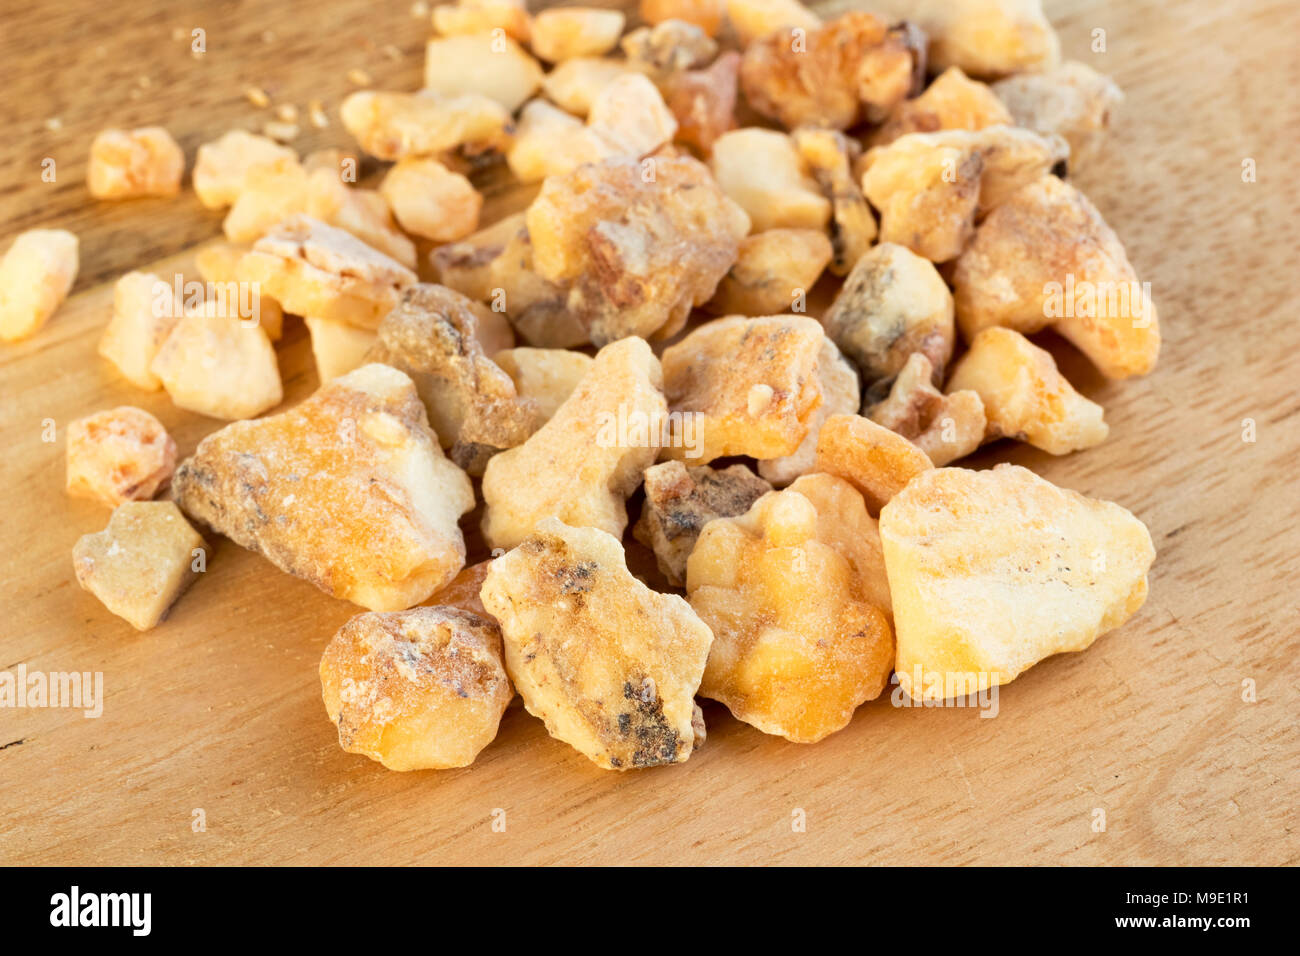 Styrax benzoin resin on a wooden background Stock Photo